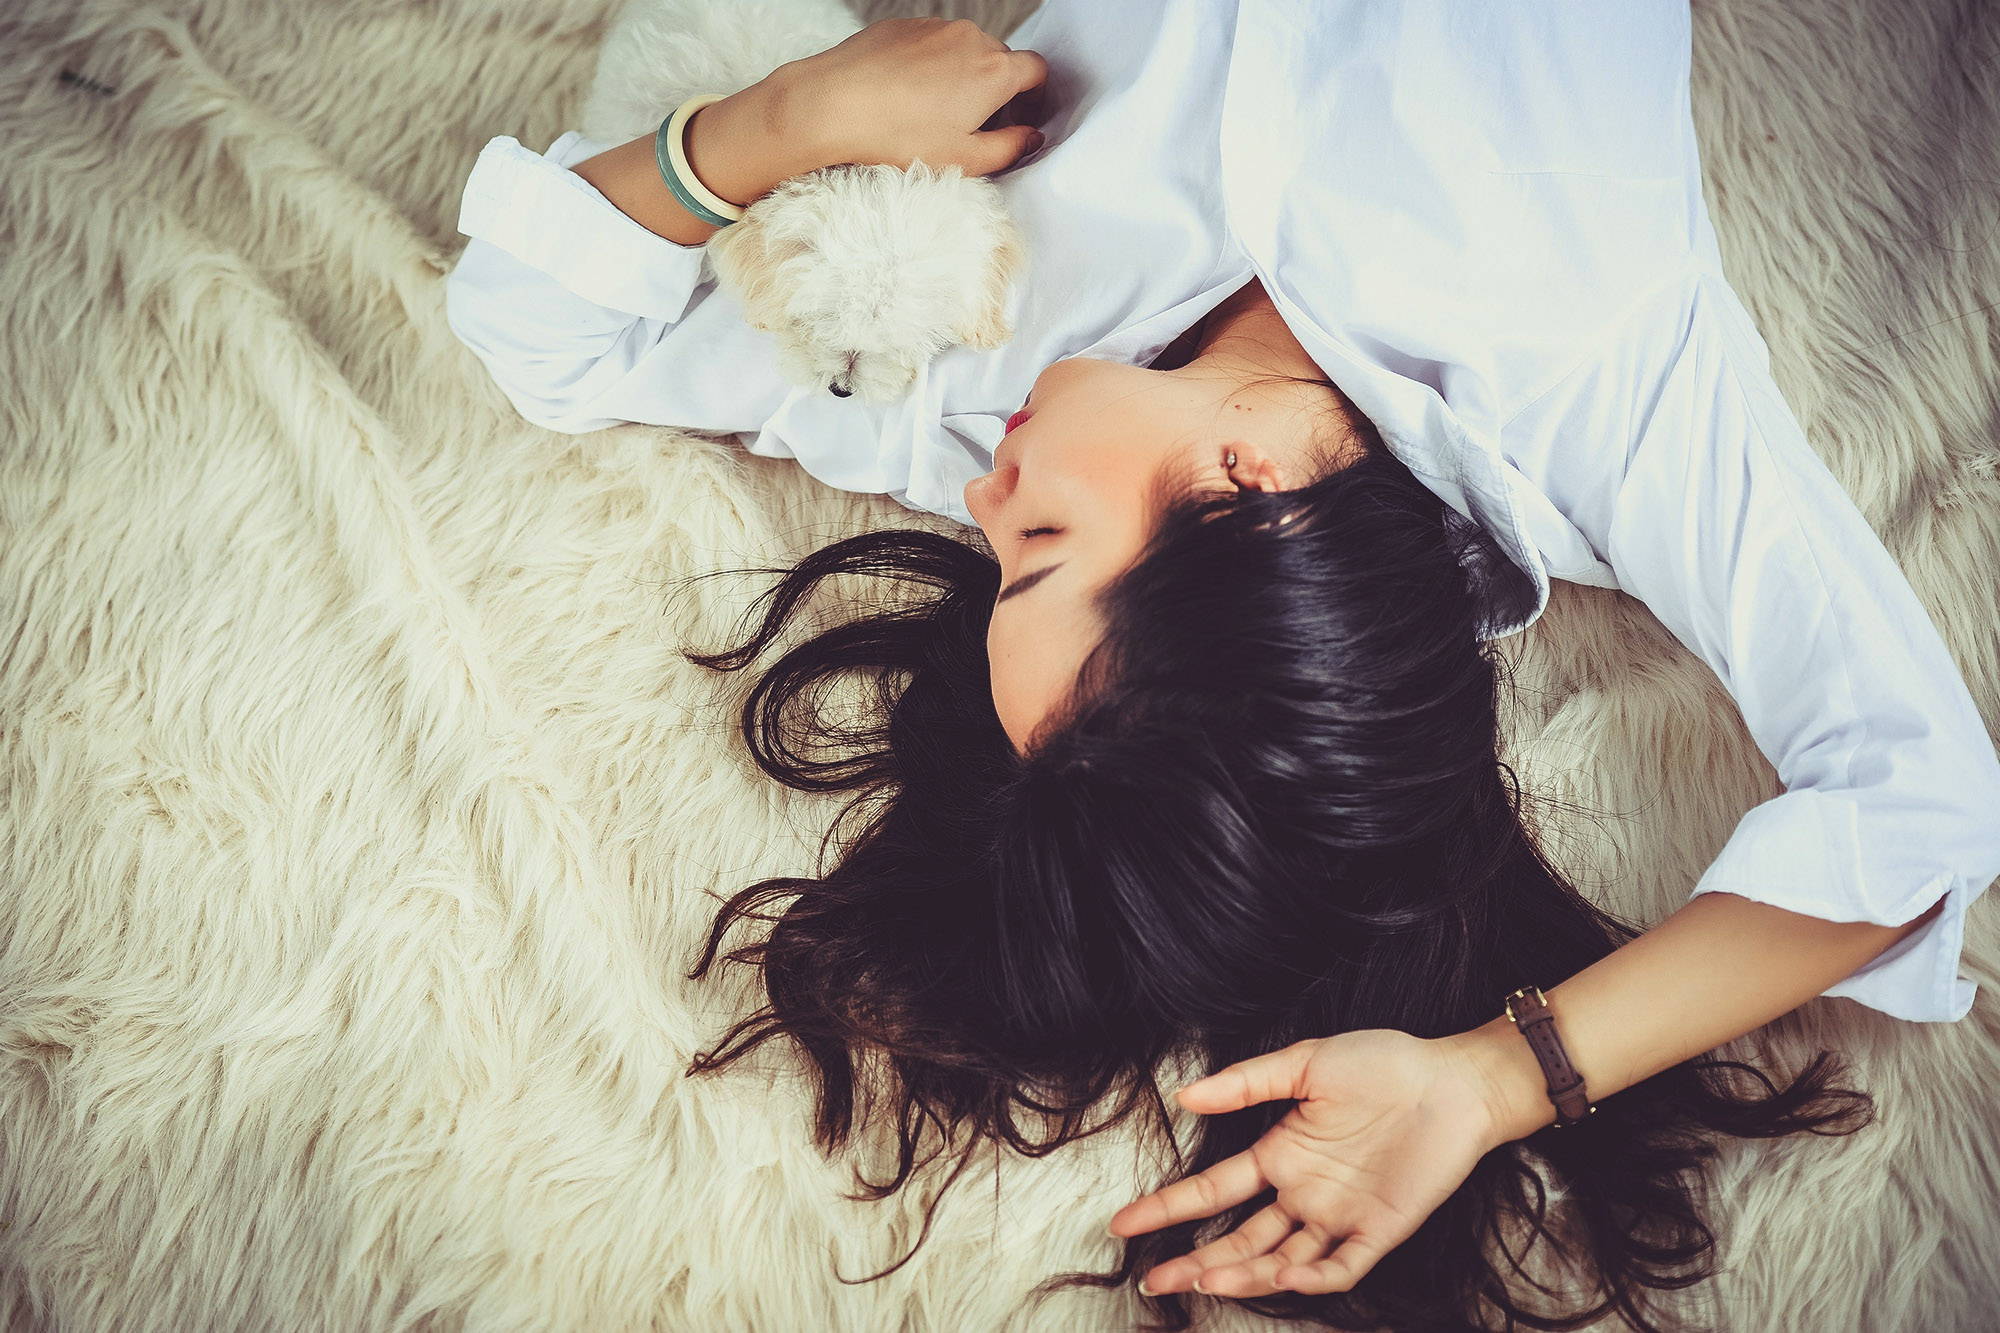 A brunette woman sleeping on her back on a fuzzy blanket with a small white dog